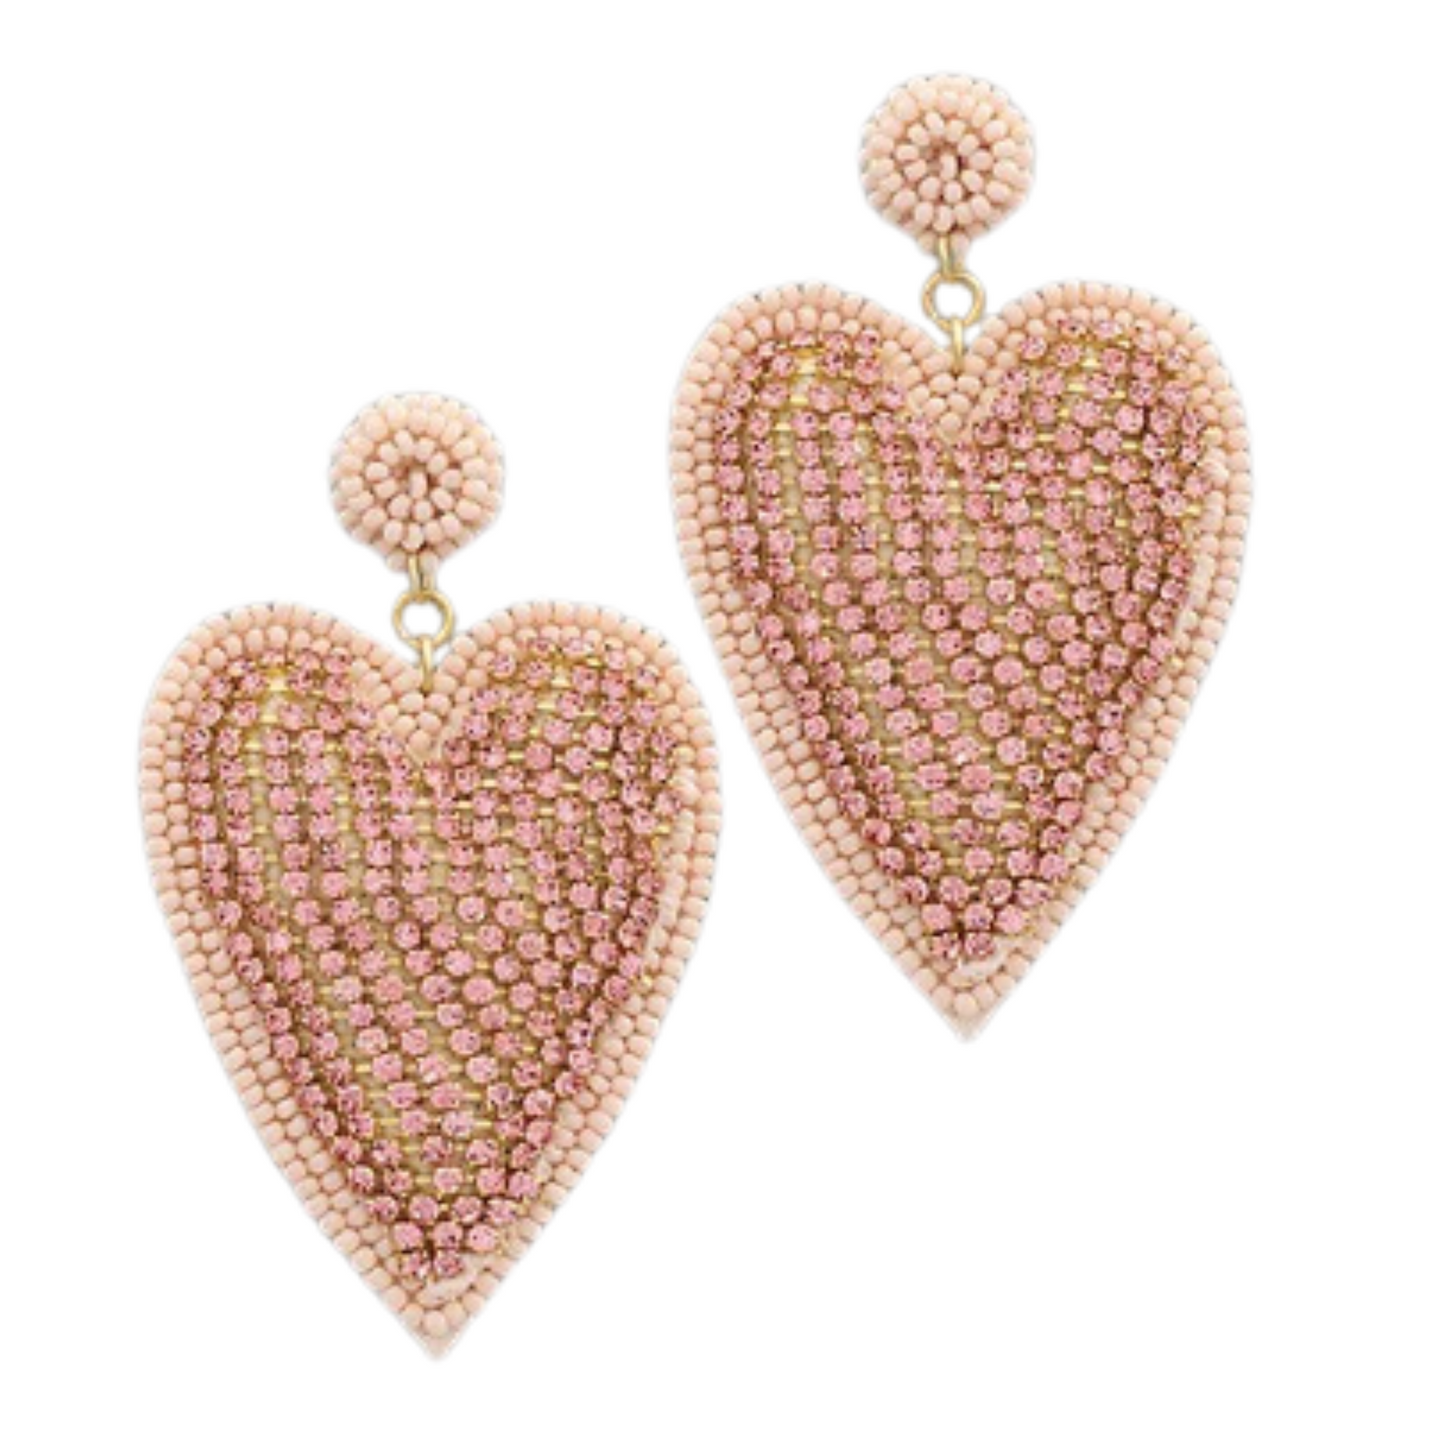 Introducing our elegant Beaded Heart Dangle Earrings. Crafted with precision, these earrings feature a heart-shaped design embellished with delicate beads in a beautiful pastel pink hue. A statement piece for any occasion, these dangle earrings will add a touch of sophistication to your outfit.